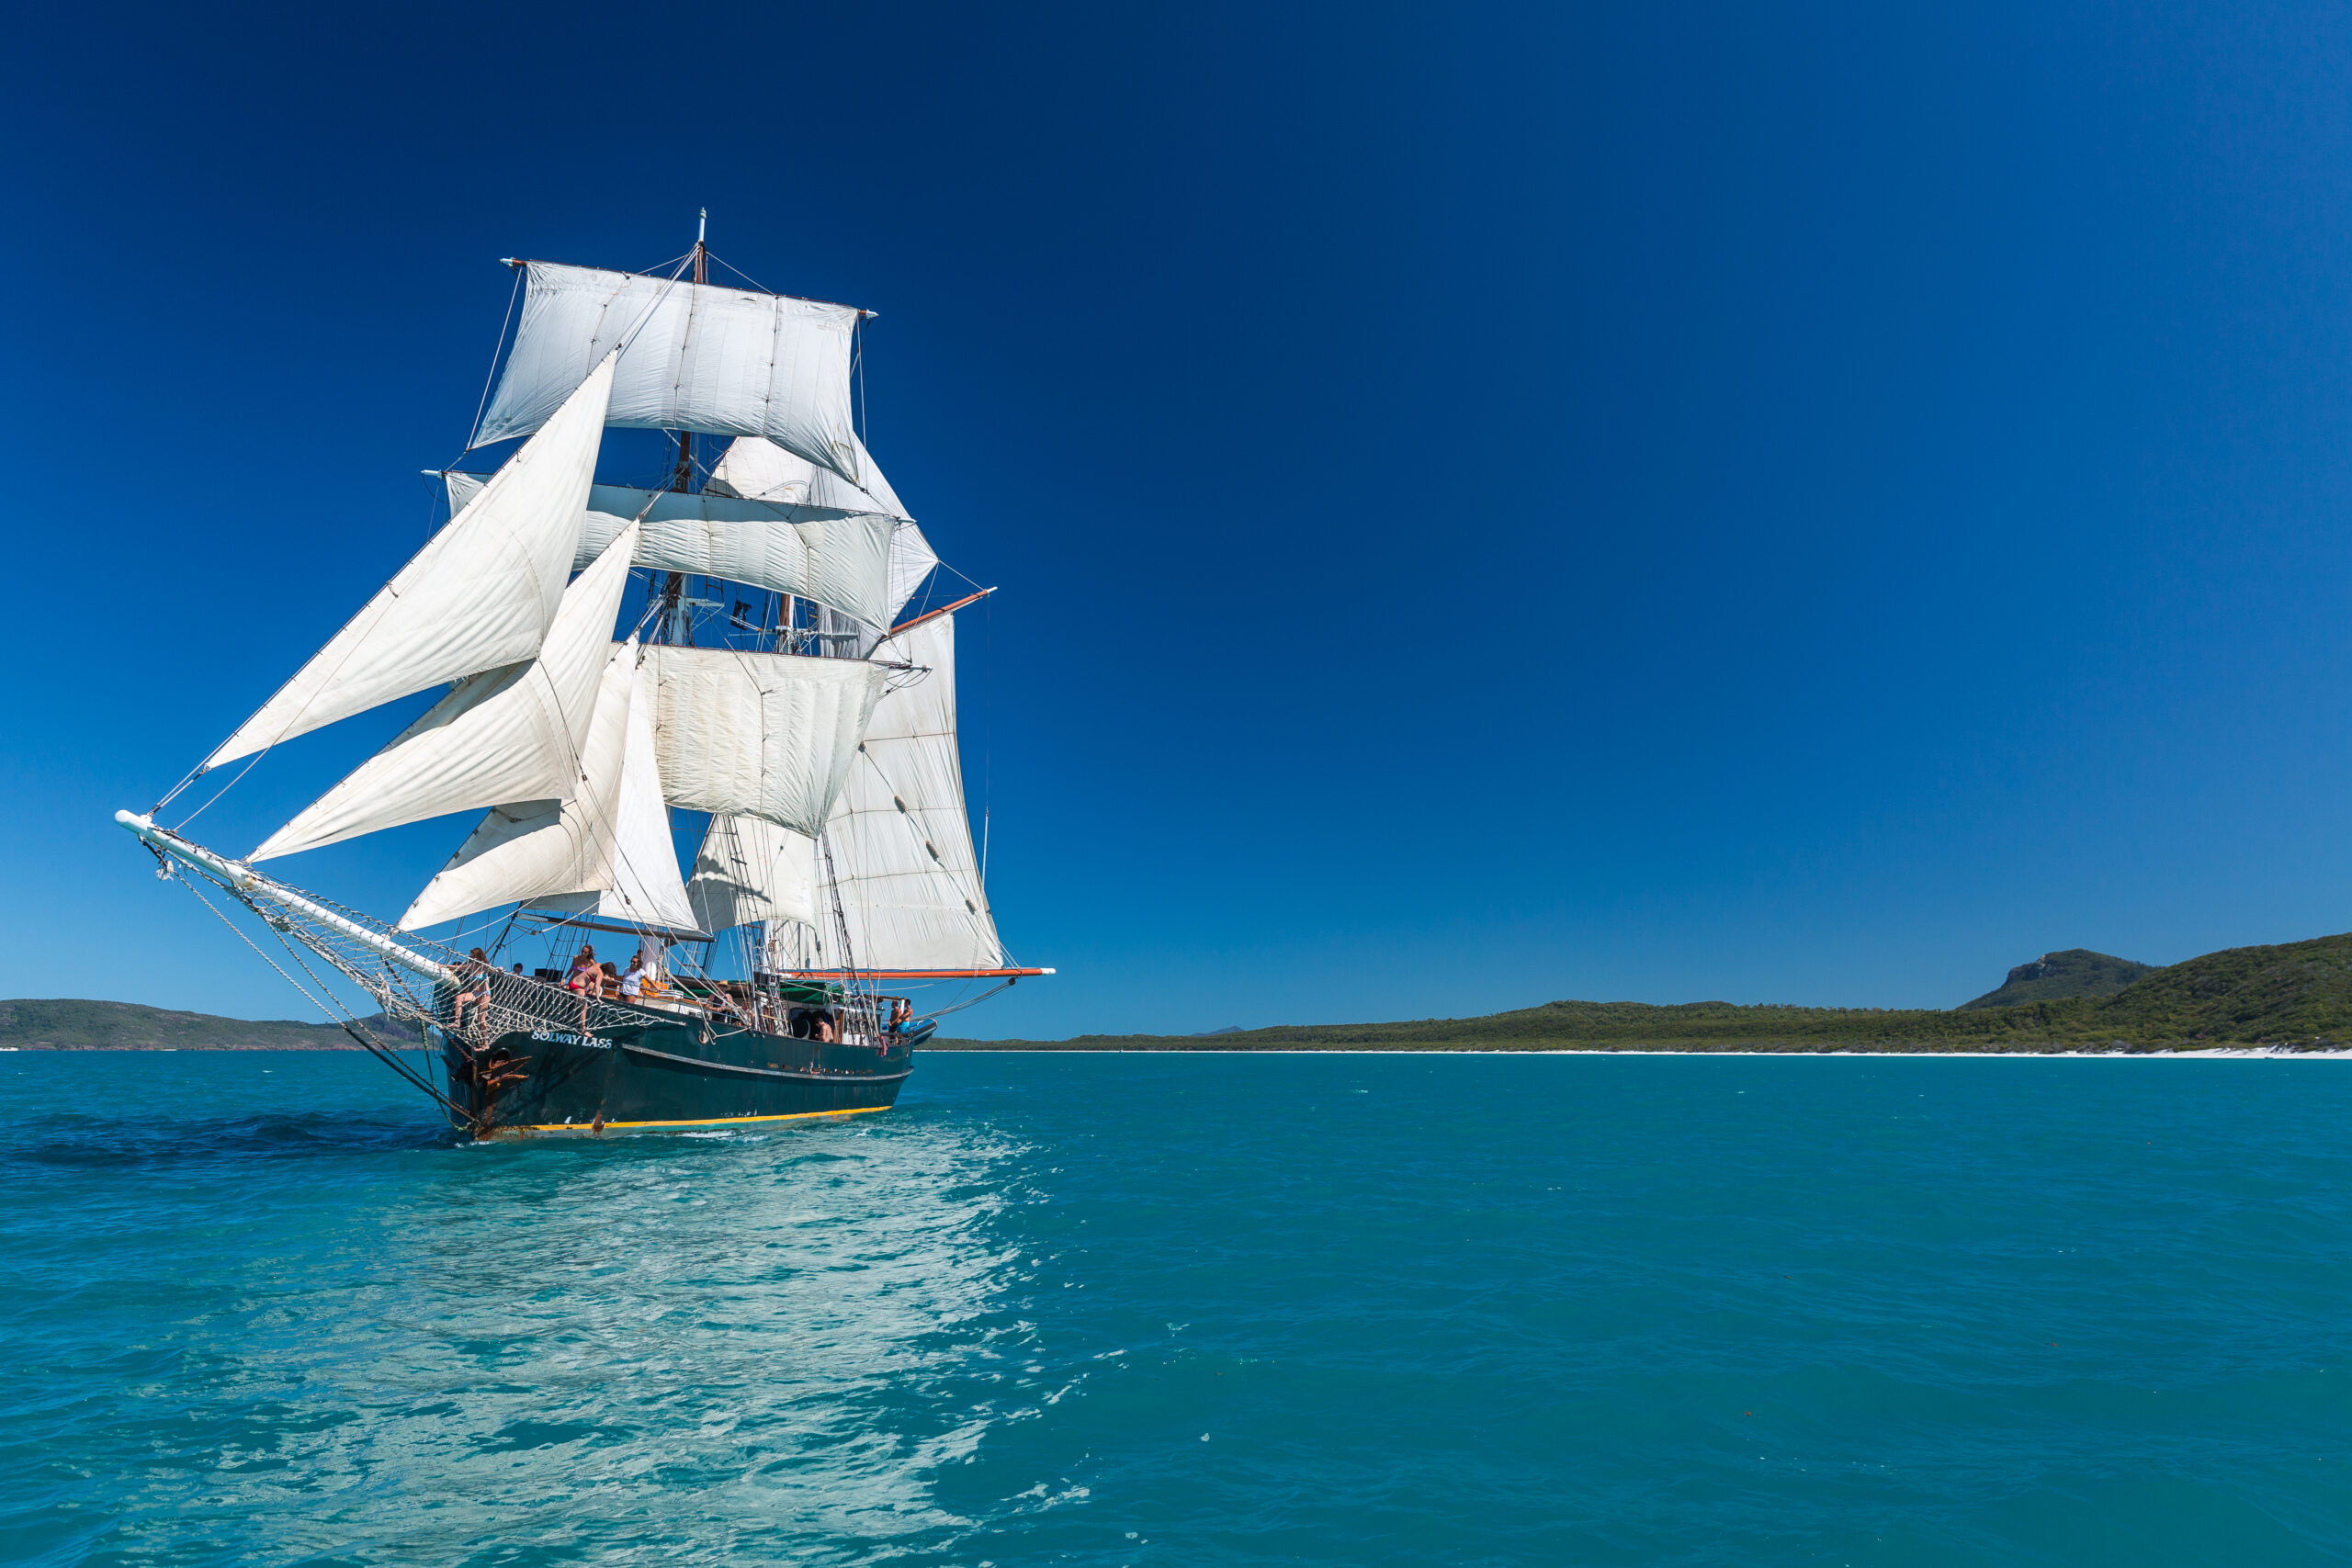 Tall ship with sails up